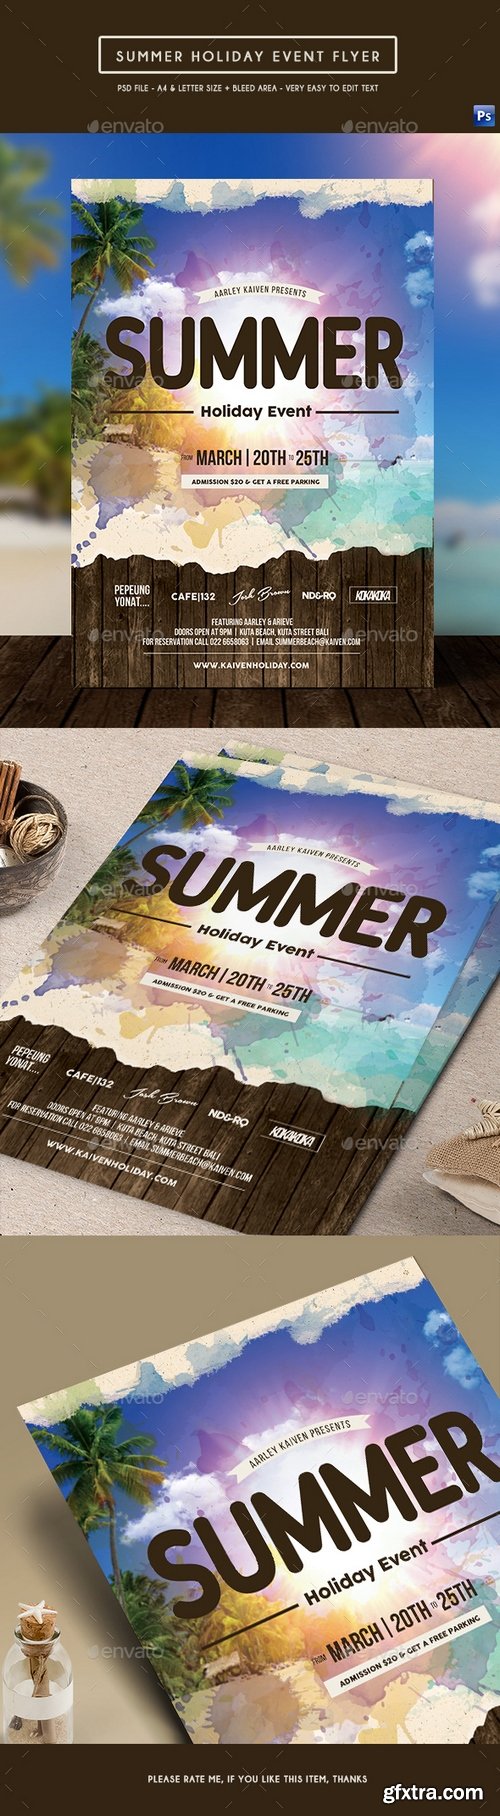 Graphicriver - Summer Holiday Event Flyer 17373420